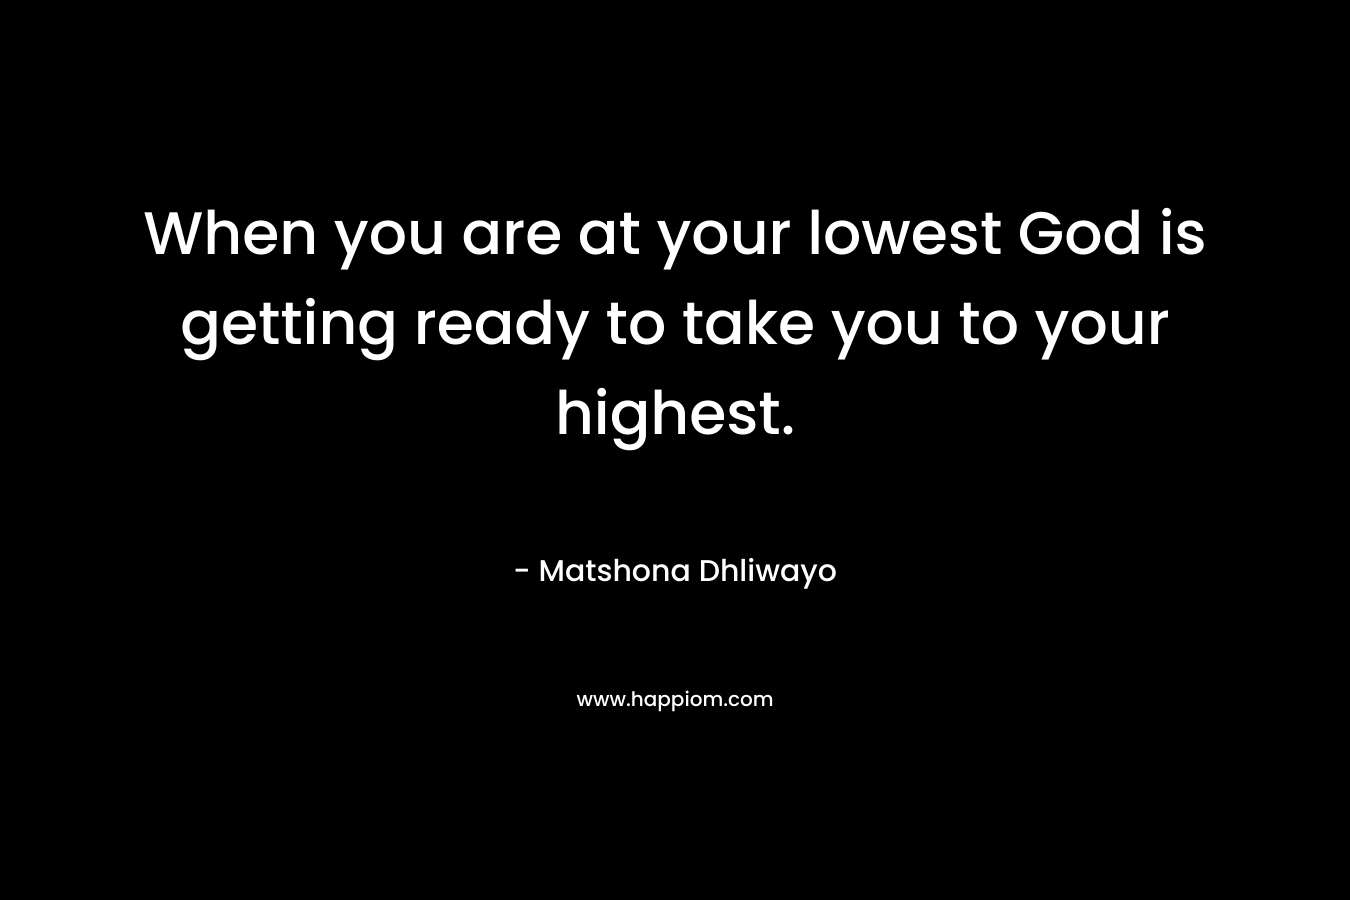 When you are at your lowest God is getting ready to take you to your highest. – Matshona Dhliwayo